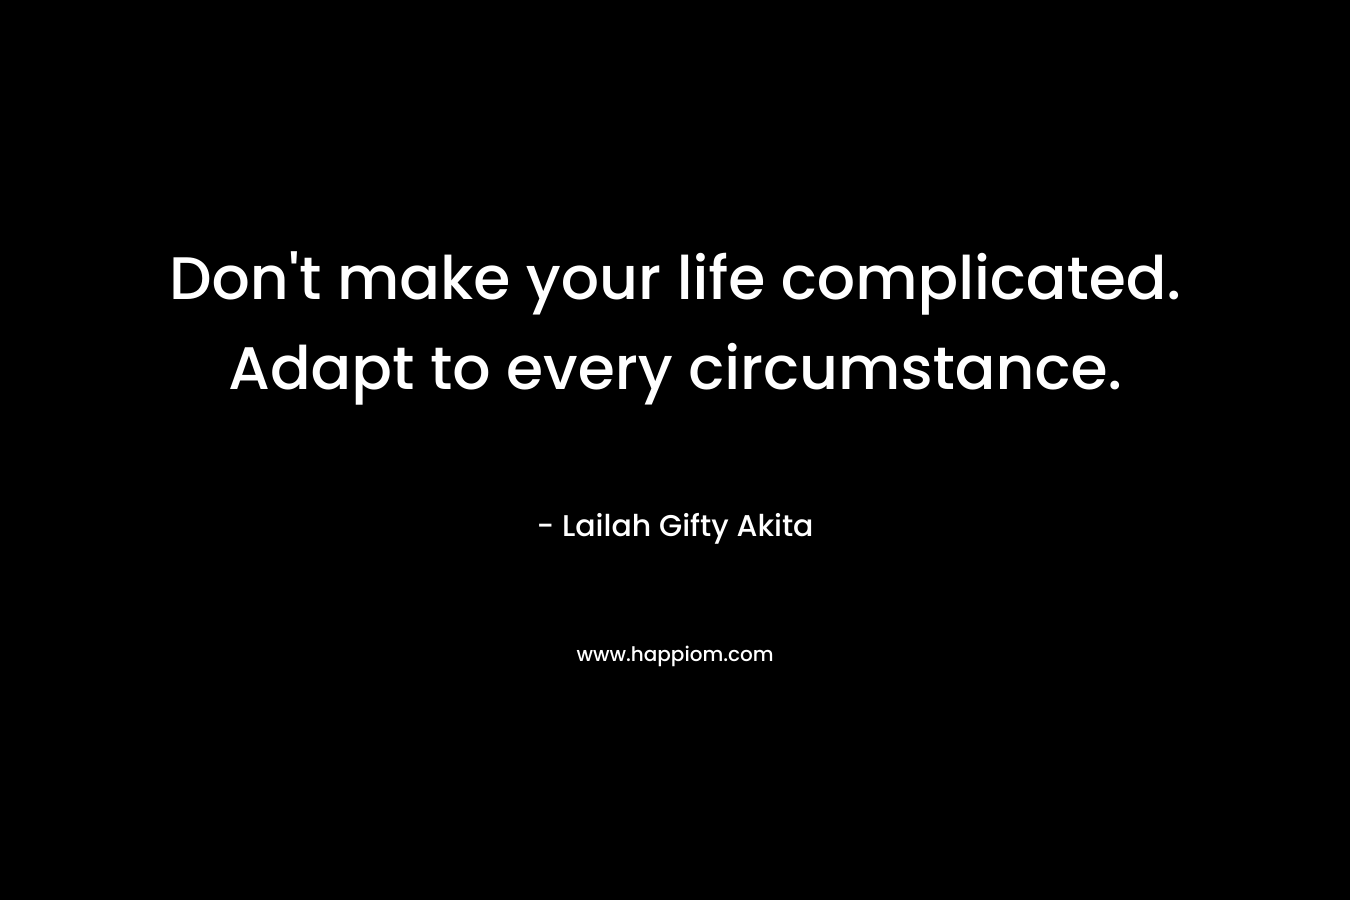 Don’t make your life complicated. Adapt to every circumstance. – Lailah Gifty Akita